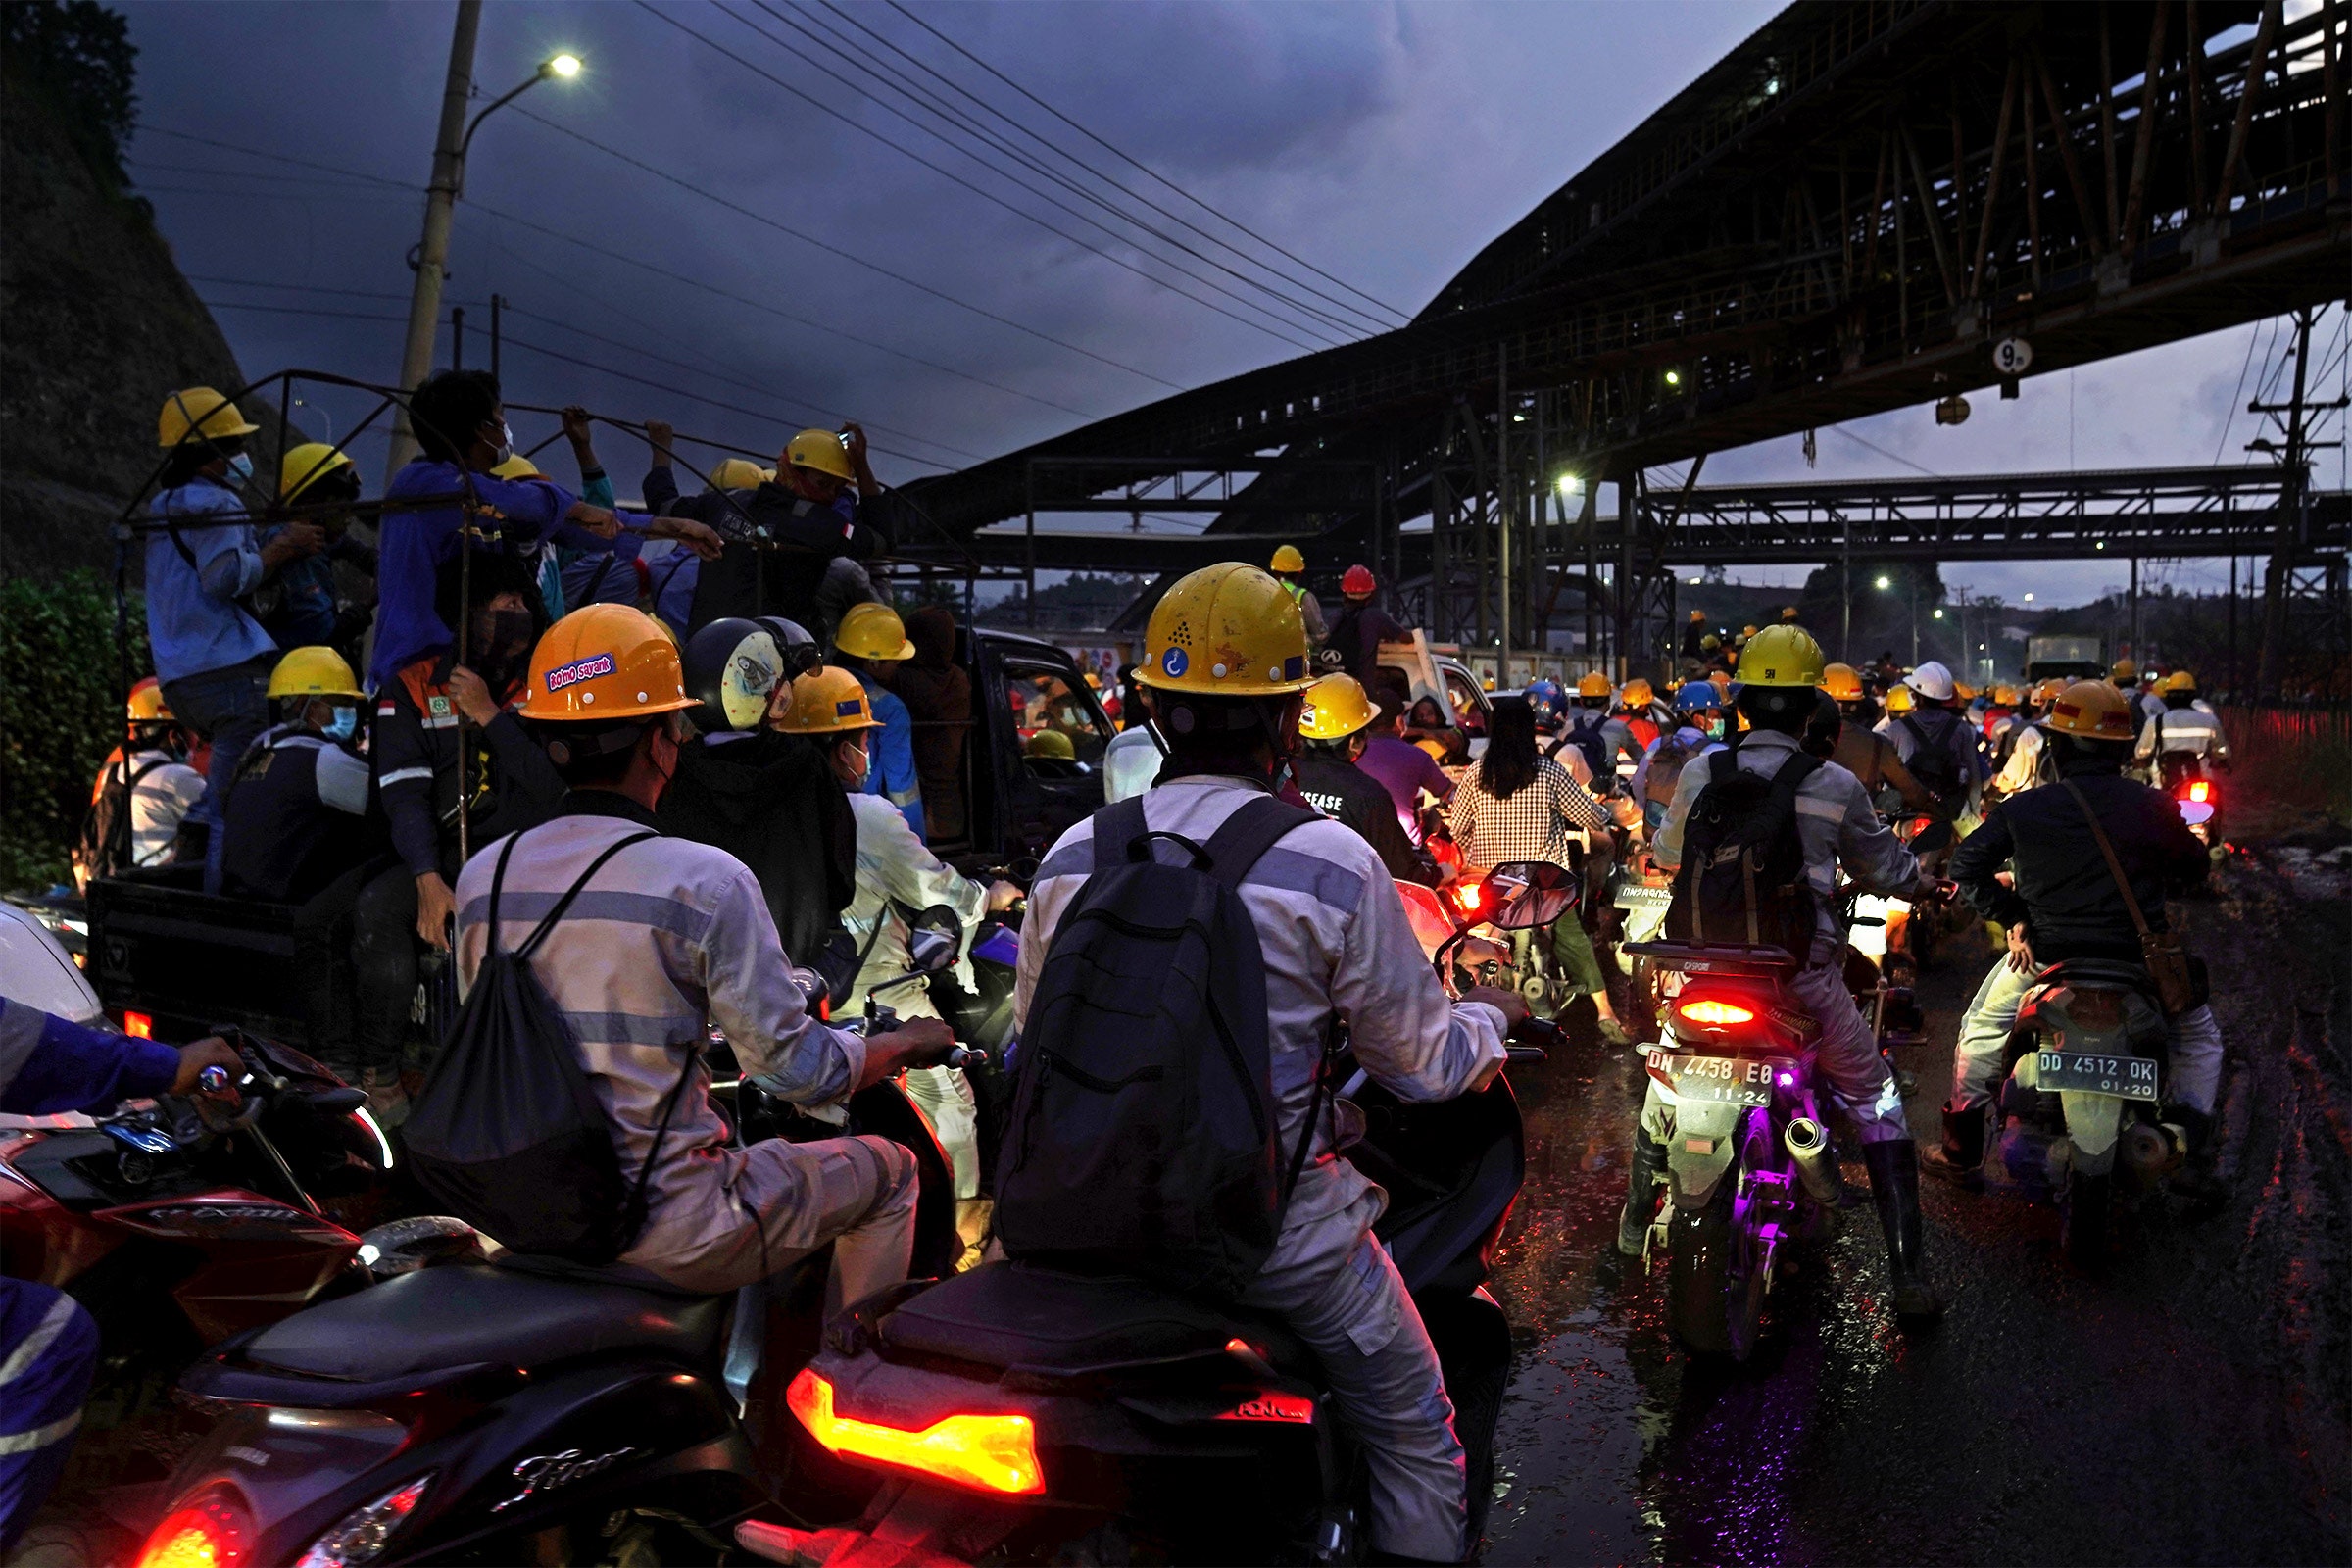 Vehicles in traffic during the evening rush hour near Indonesia Morowali Industrial Park